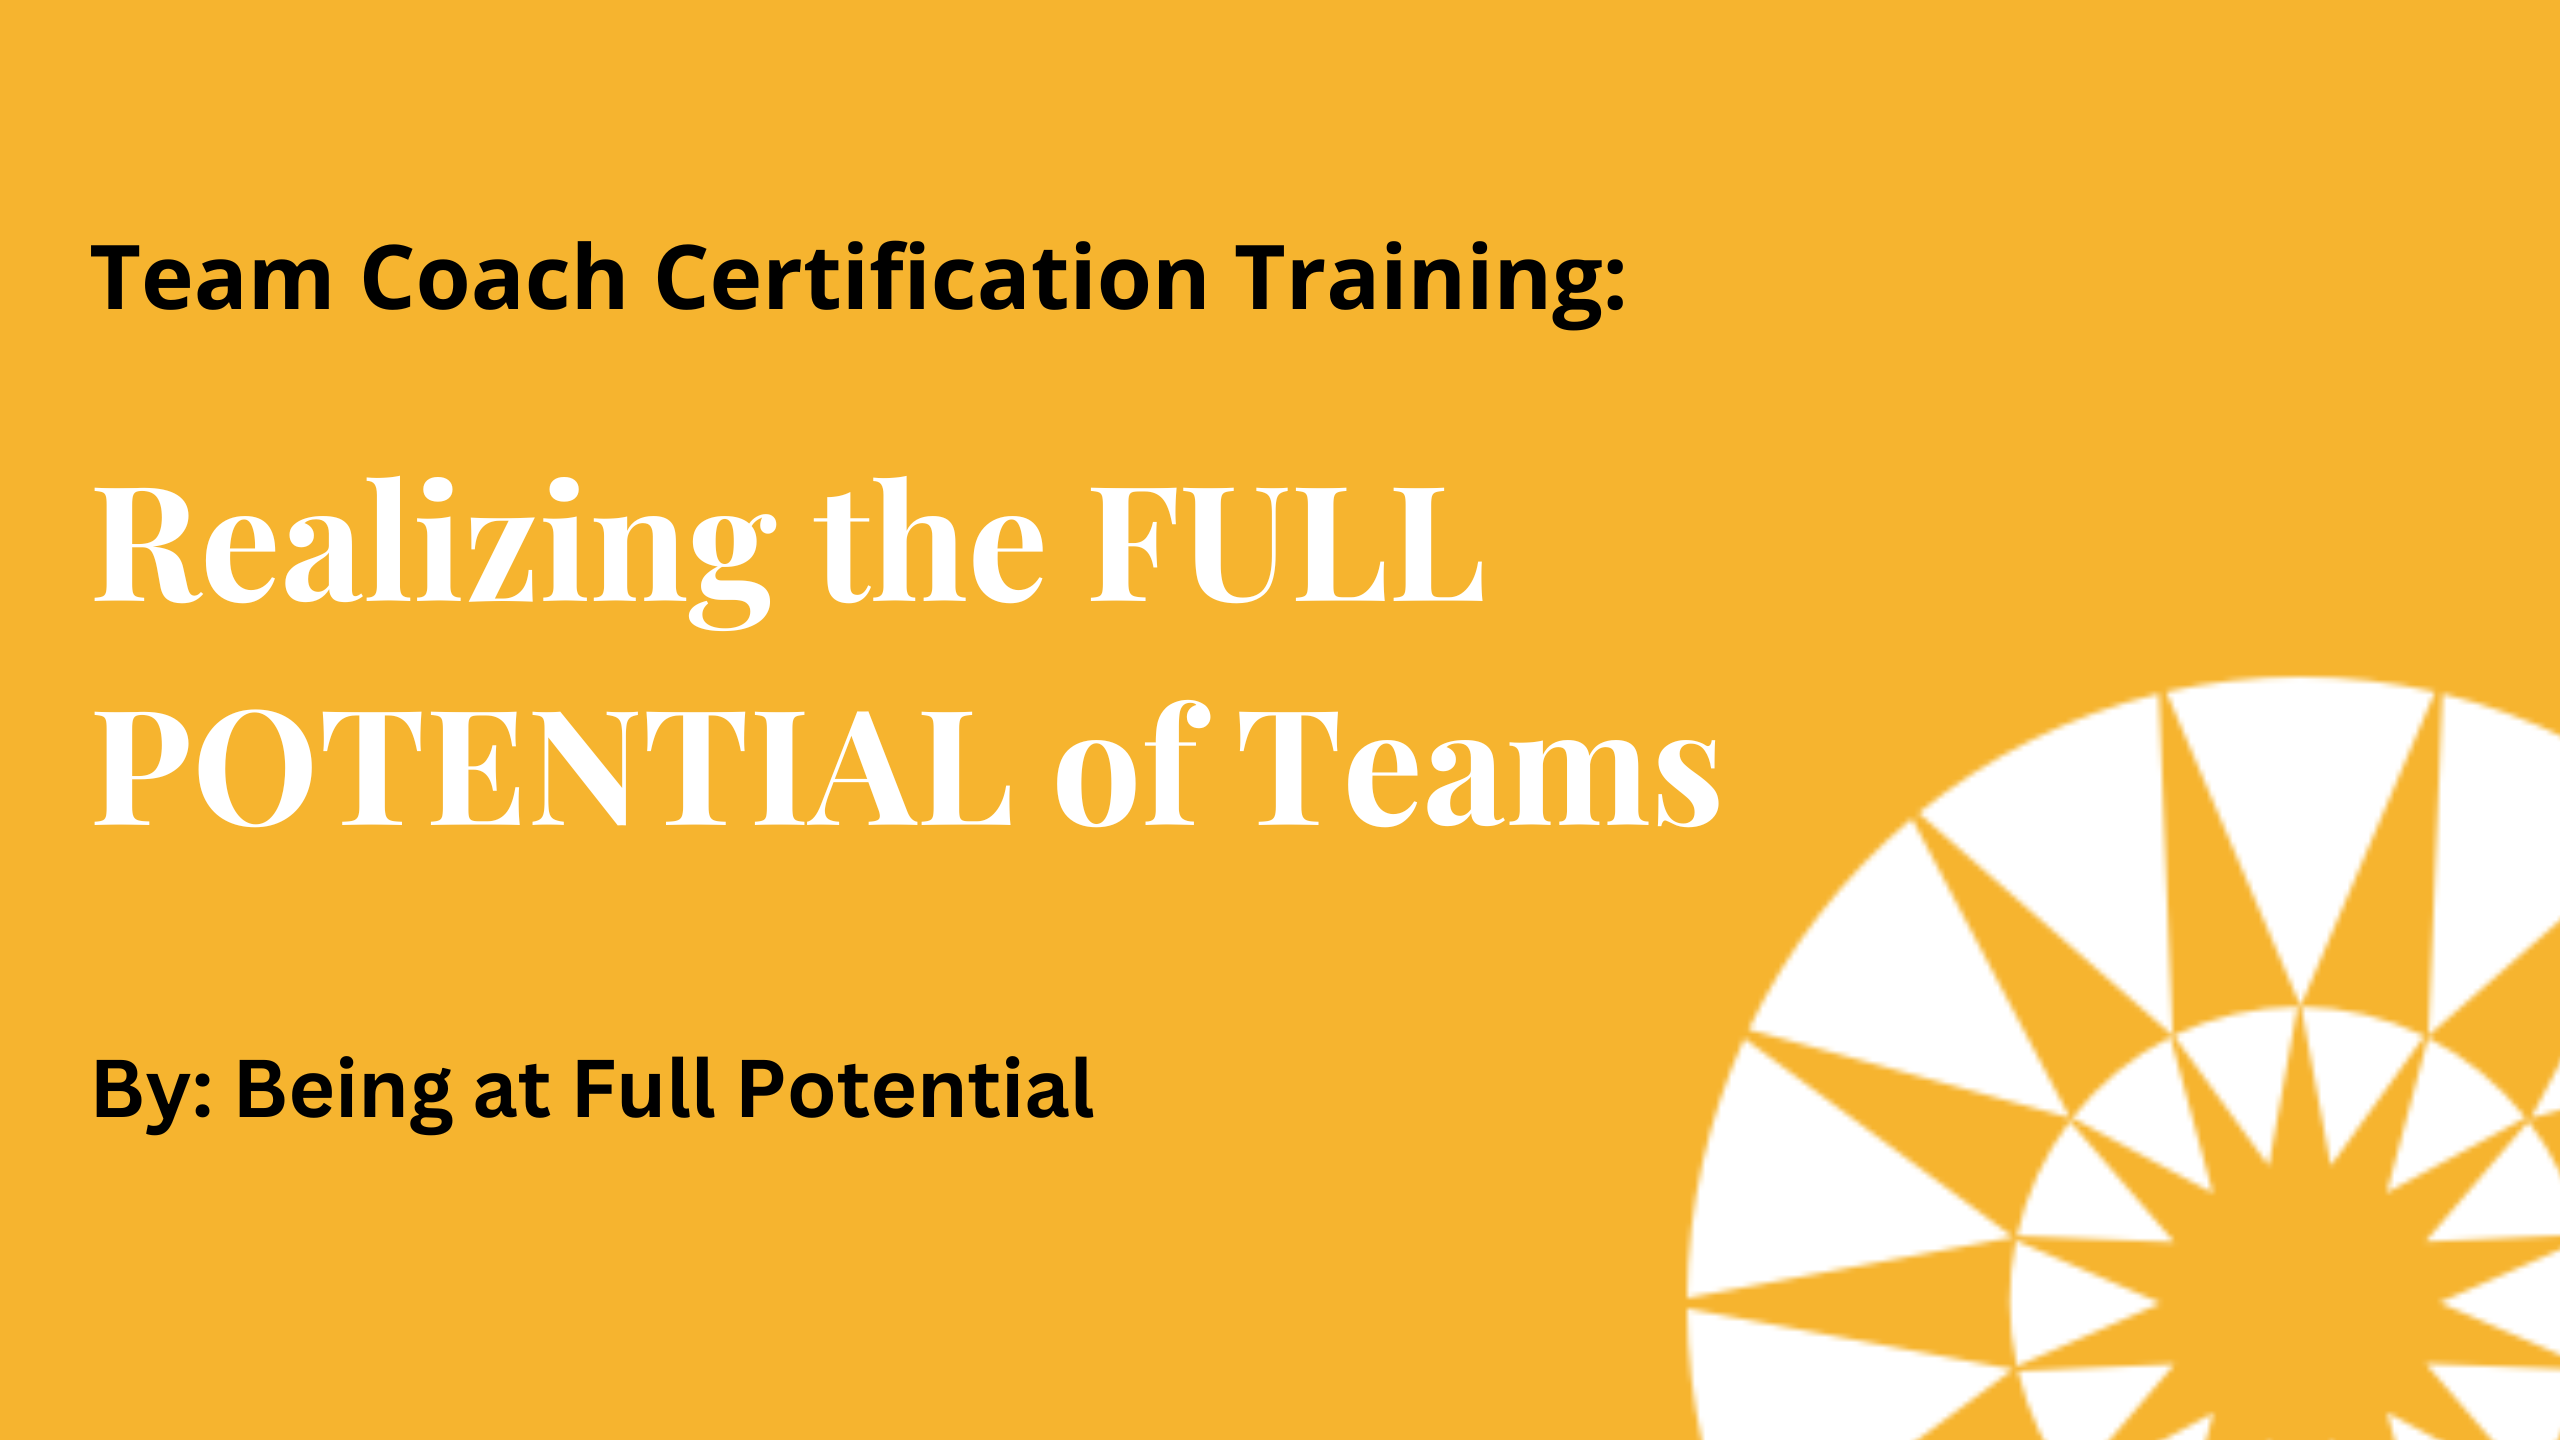 Human Potential Team Coach Certification Training